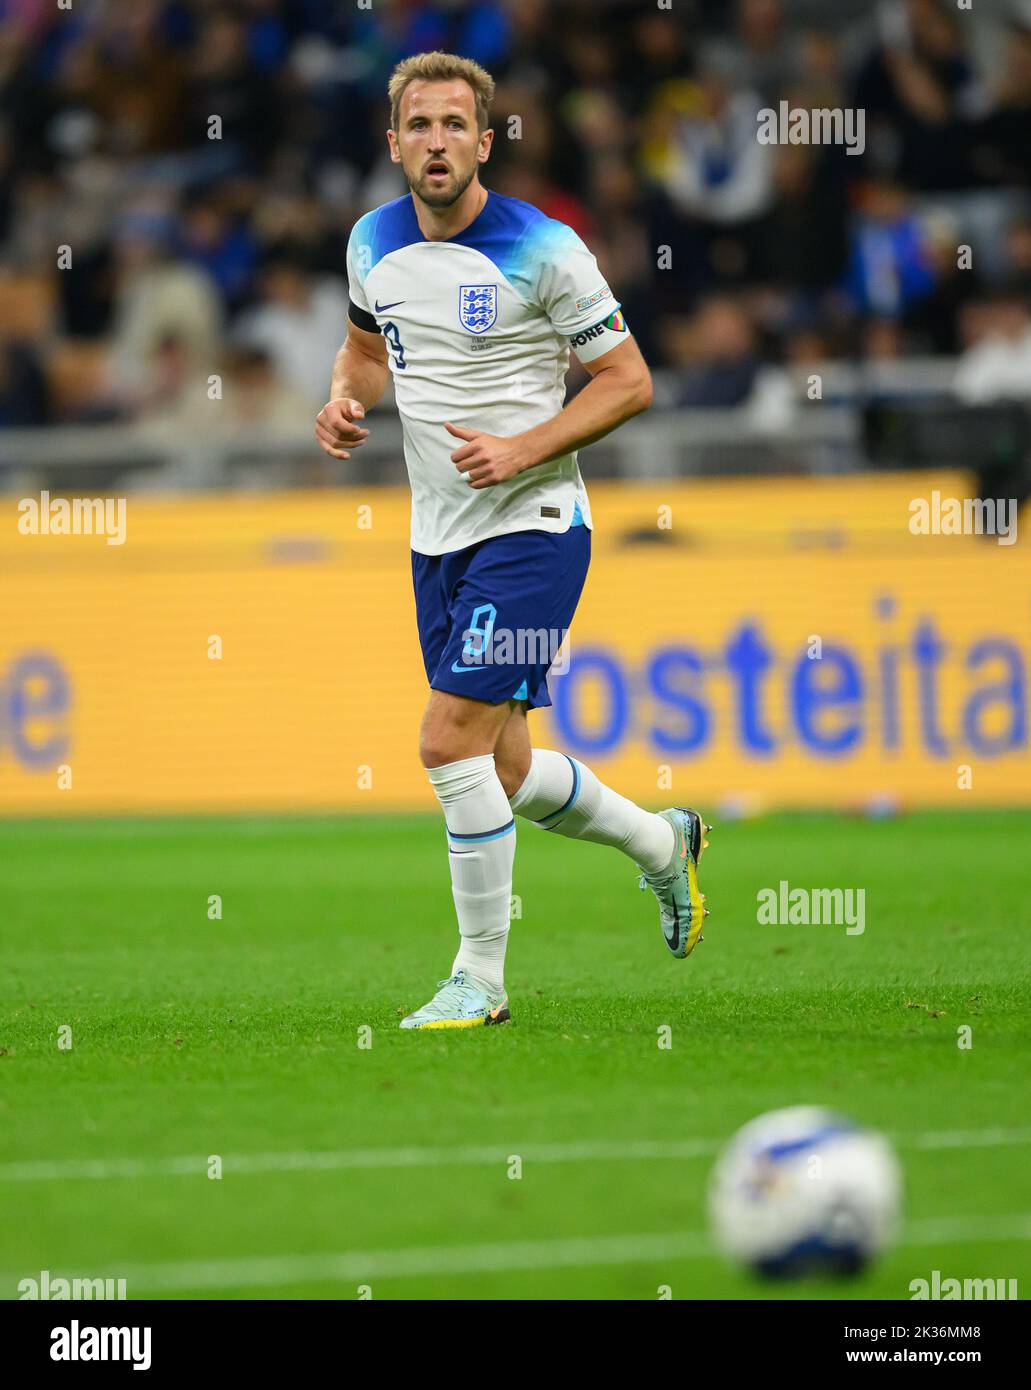 23 Sep 2022 - Italy v England - UEFA Nations League - Group 3 - San Siro  England's Harry Kane during the UEFA Nations League match against Italy. Picture : Mark Pain / Alamy Live News Stock Photo